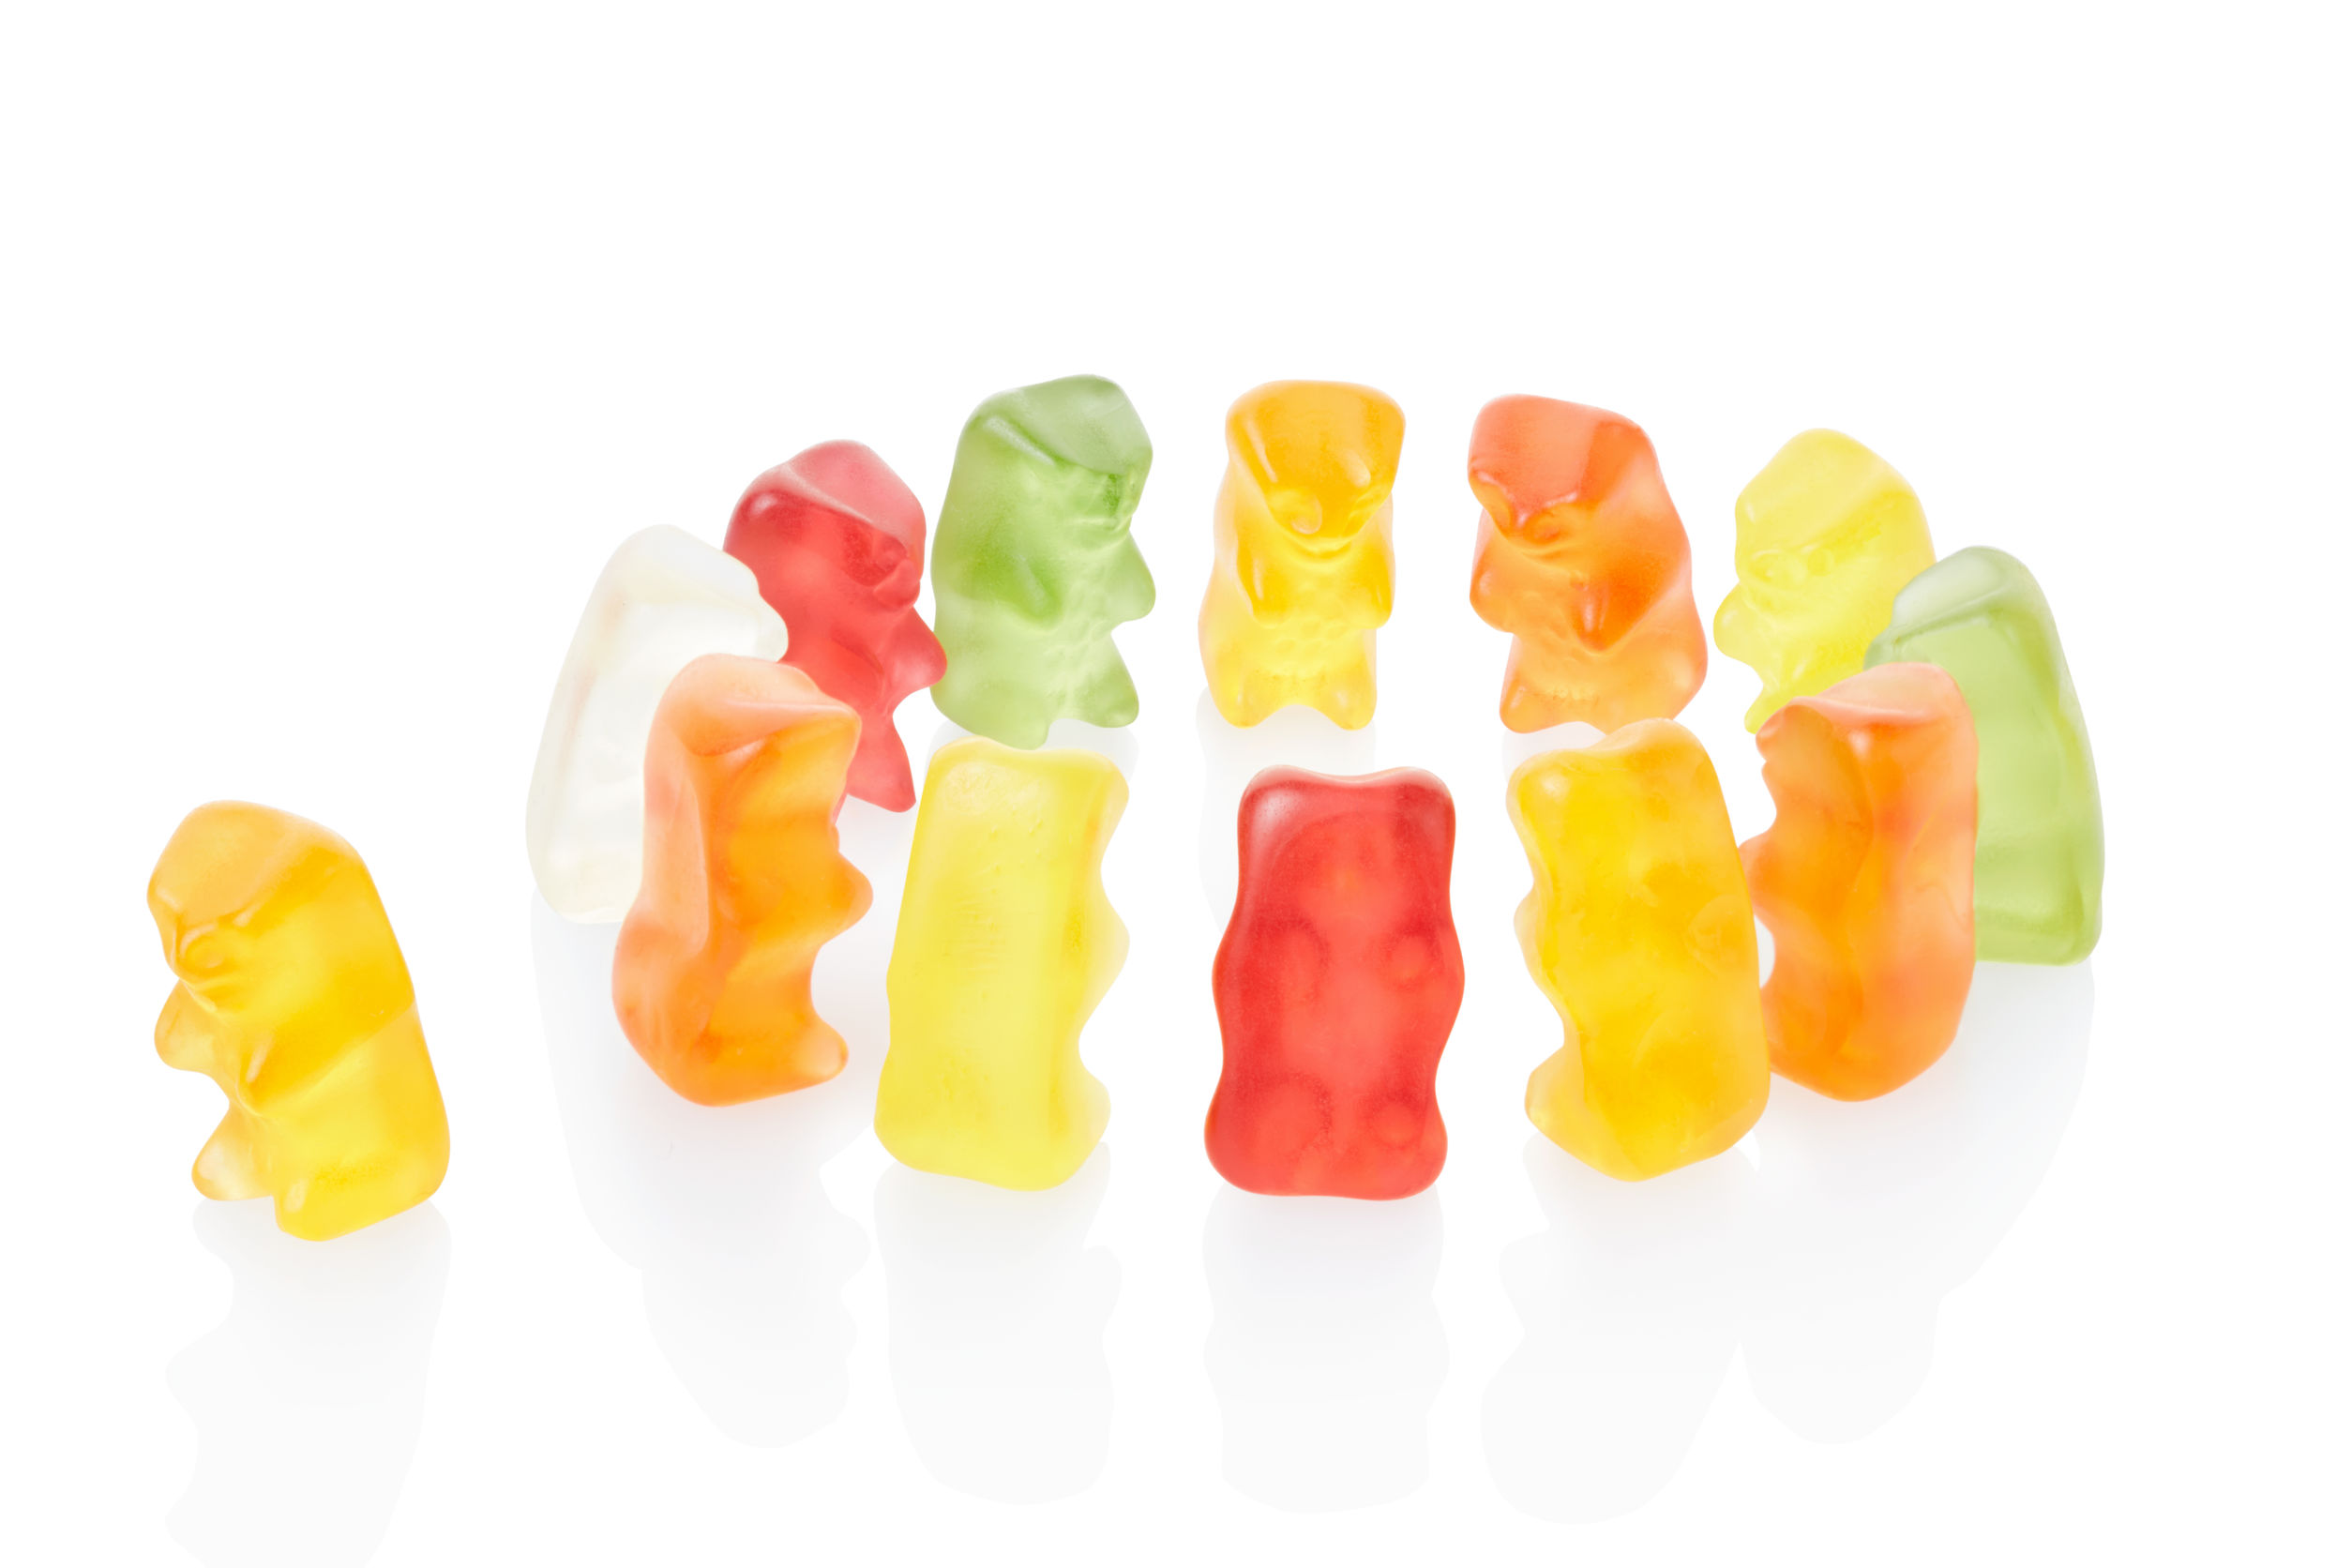 Gummy bears forming a circle and shutting out a fellow bear.